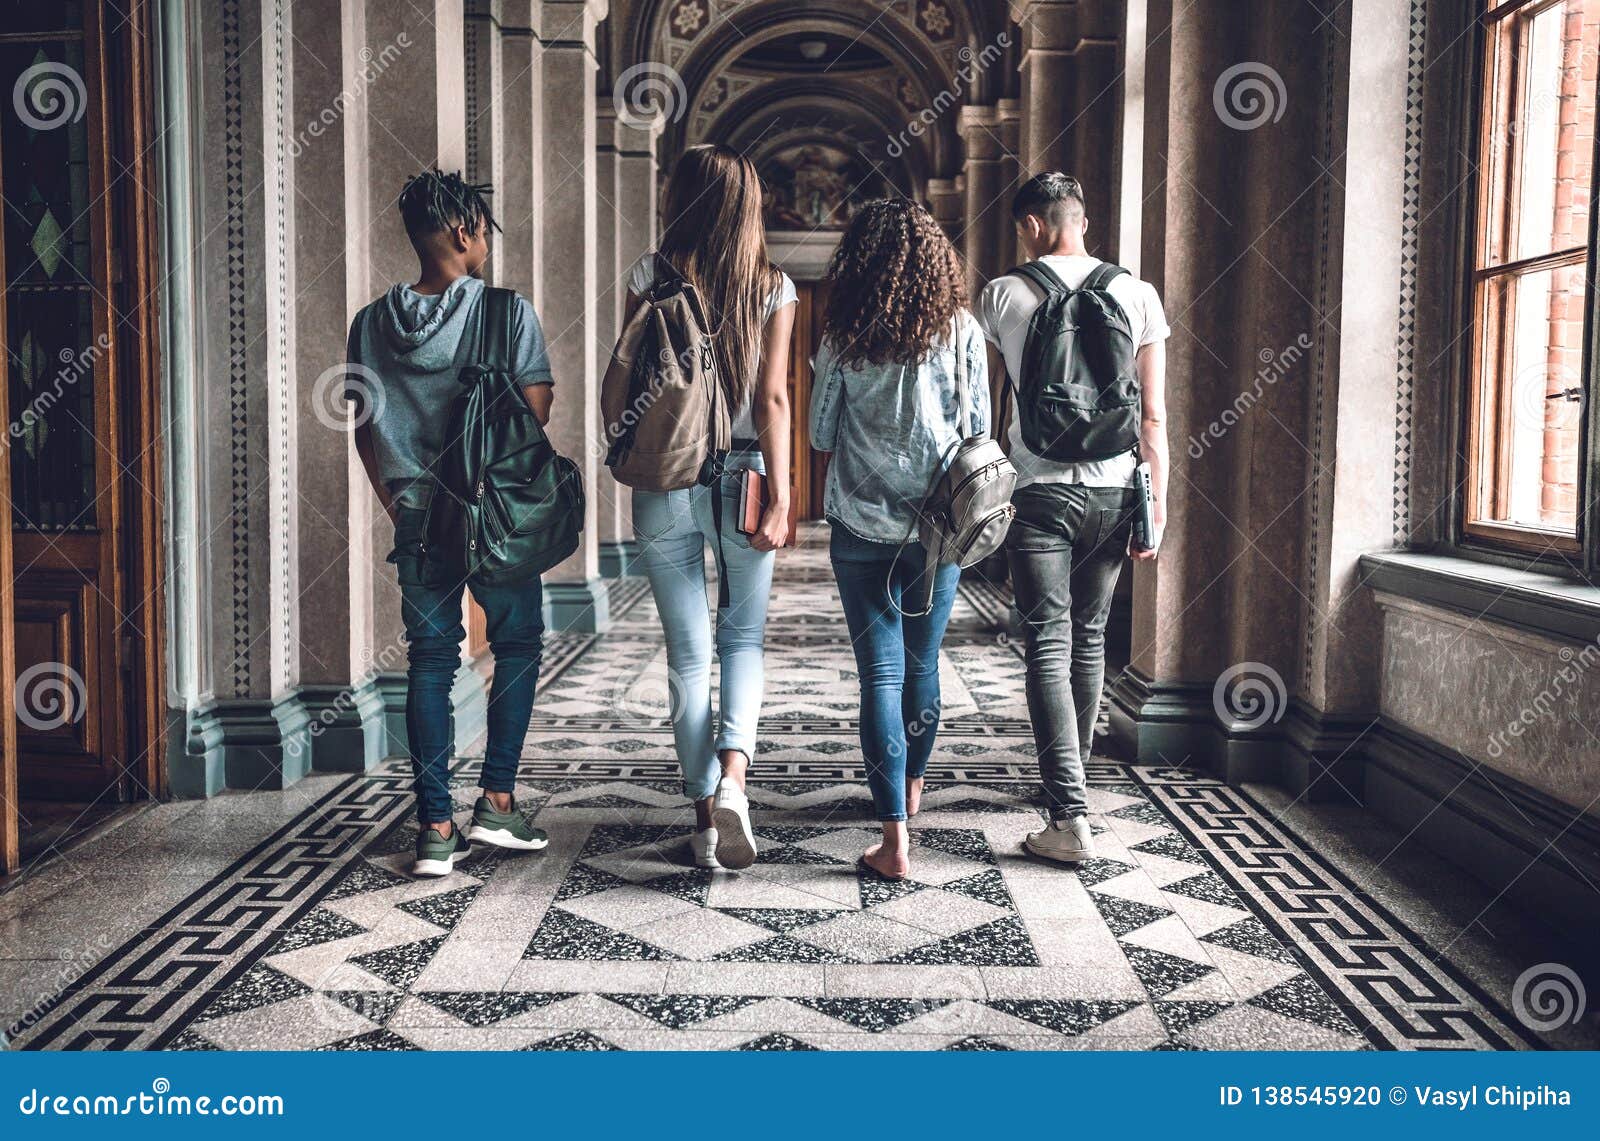 college life. group of students are walking in university hall and chatting